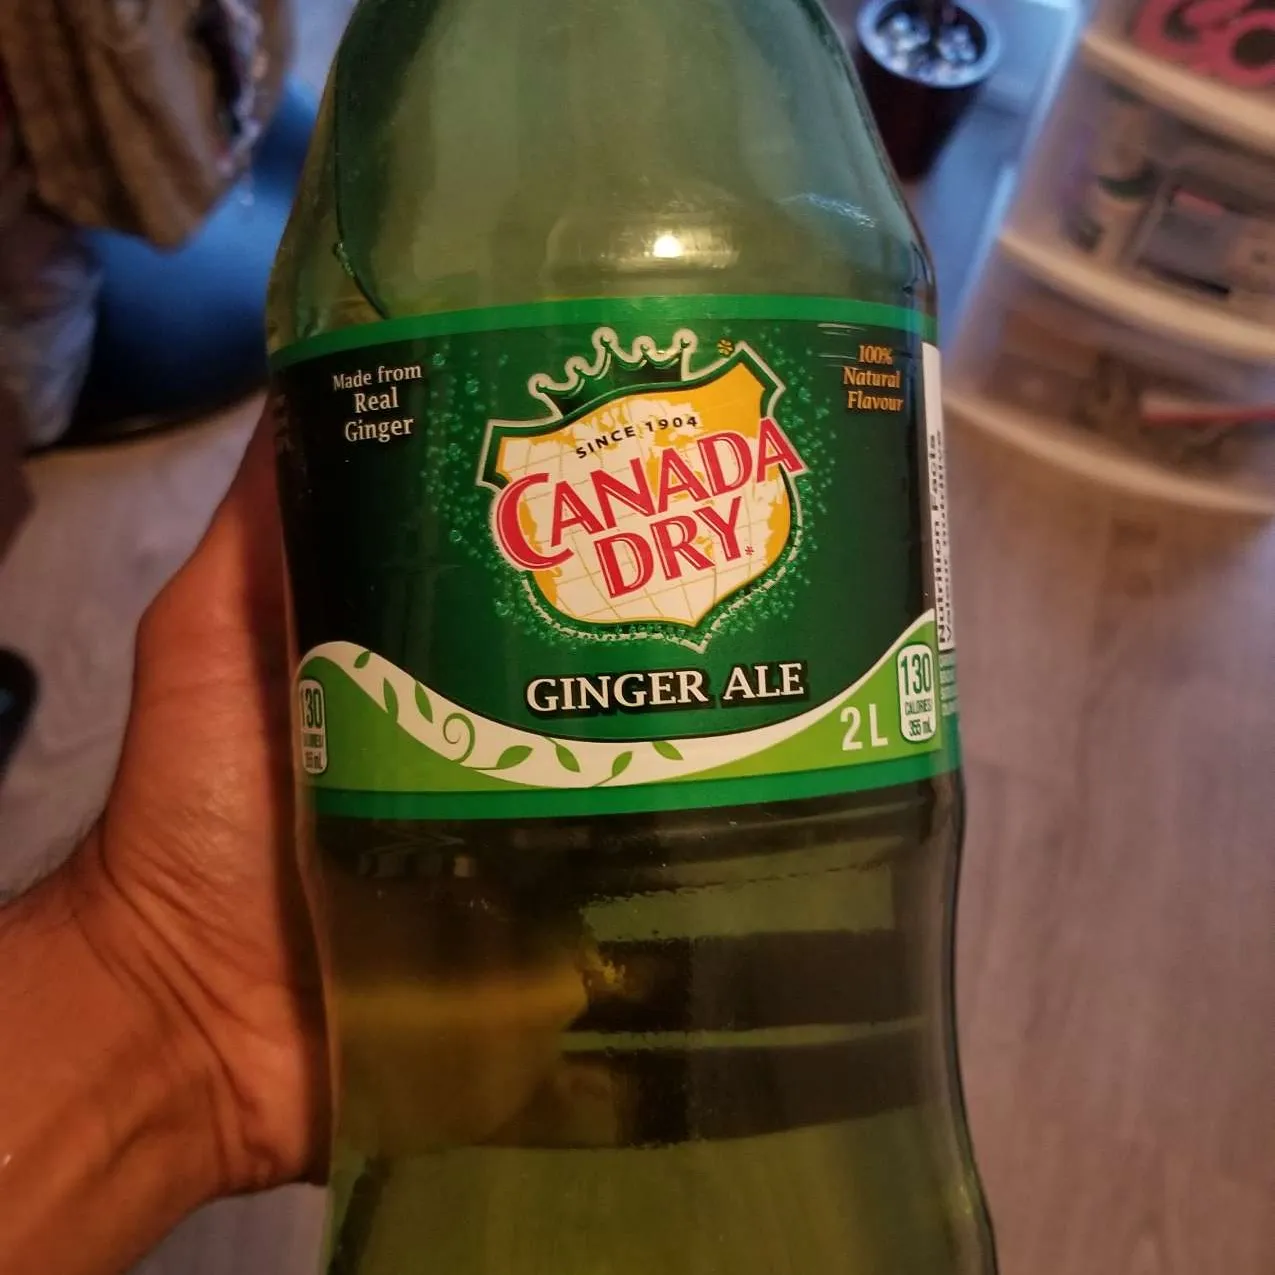 Canada Dry 2L GingerAle photo 1